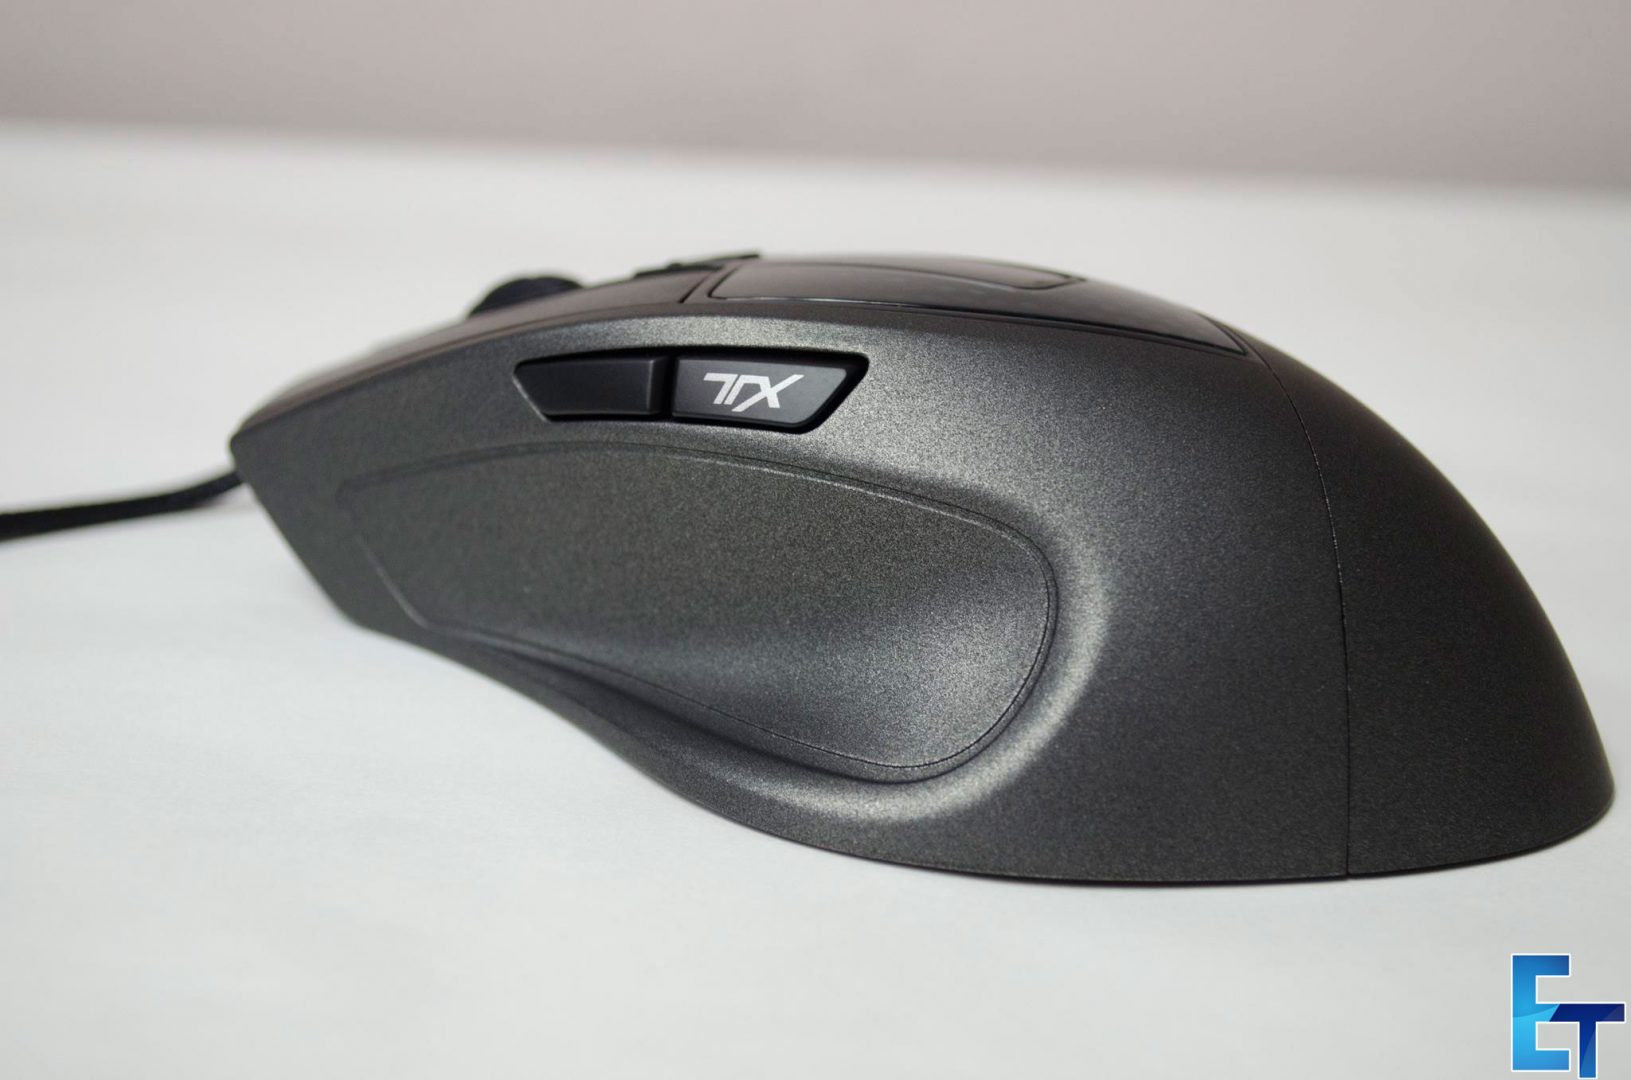 Cooler-Master-Sentinel-III-Ergonomic-Gaming-Mouse-Review_8